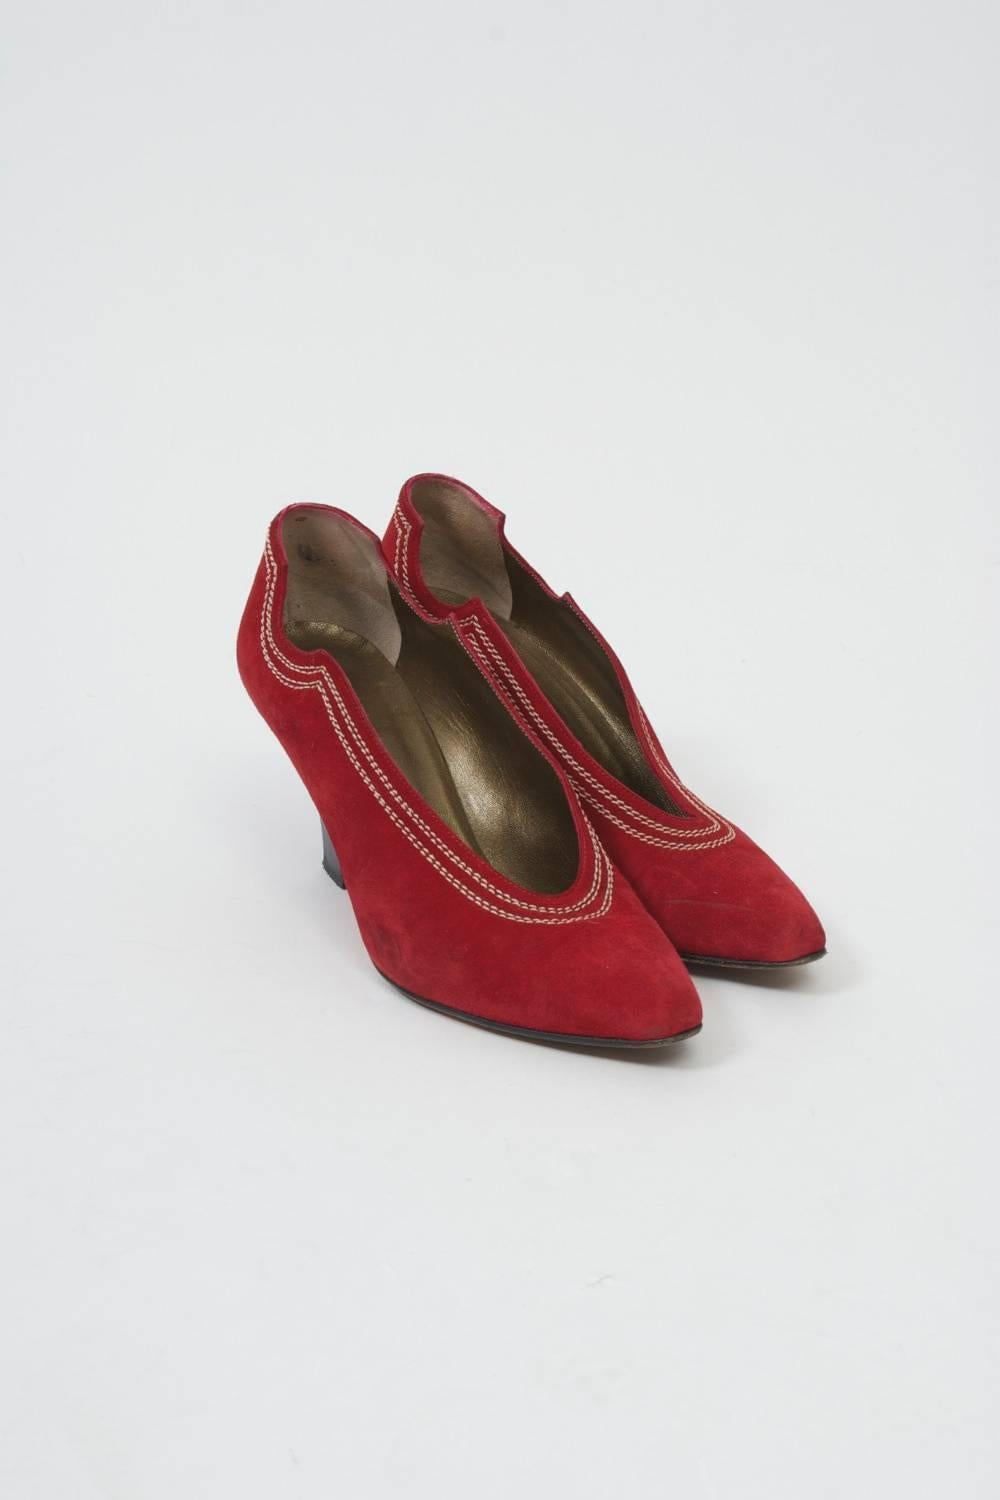 Red suede YSL pumps featuring a double row of white stitching and half-circle cutouts near ankle, an oval instep and black heel. Classic with a twist.